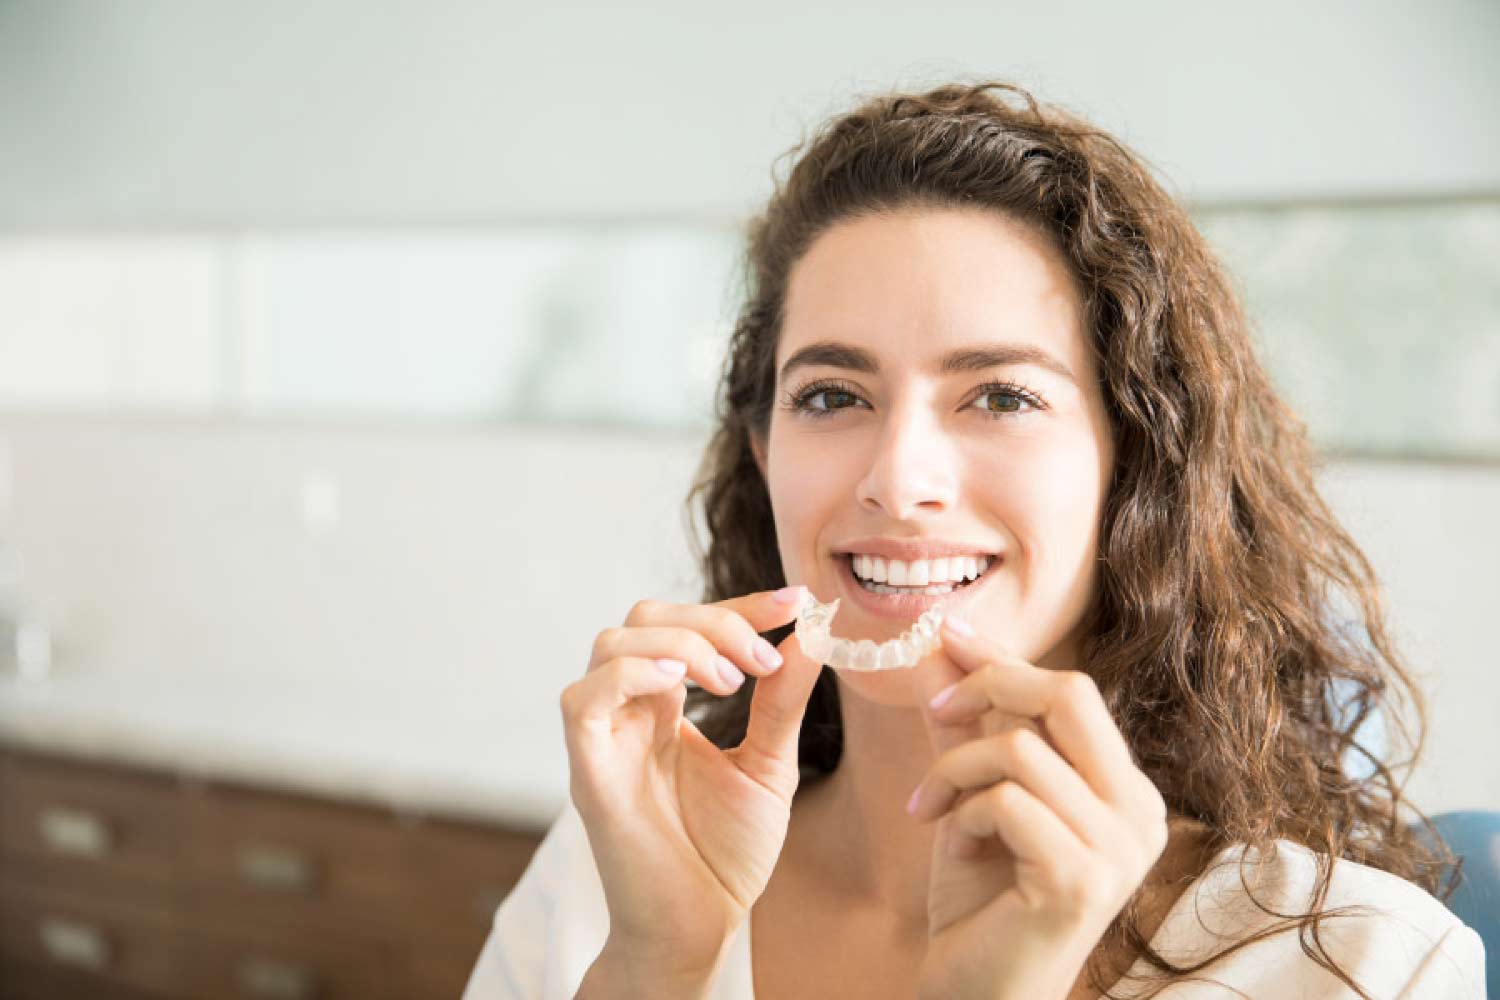 Brunette smiling woman holding a clear aligner.